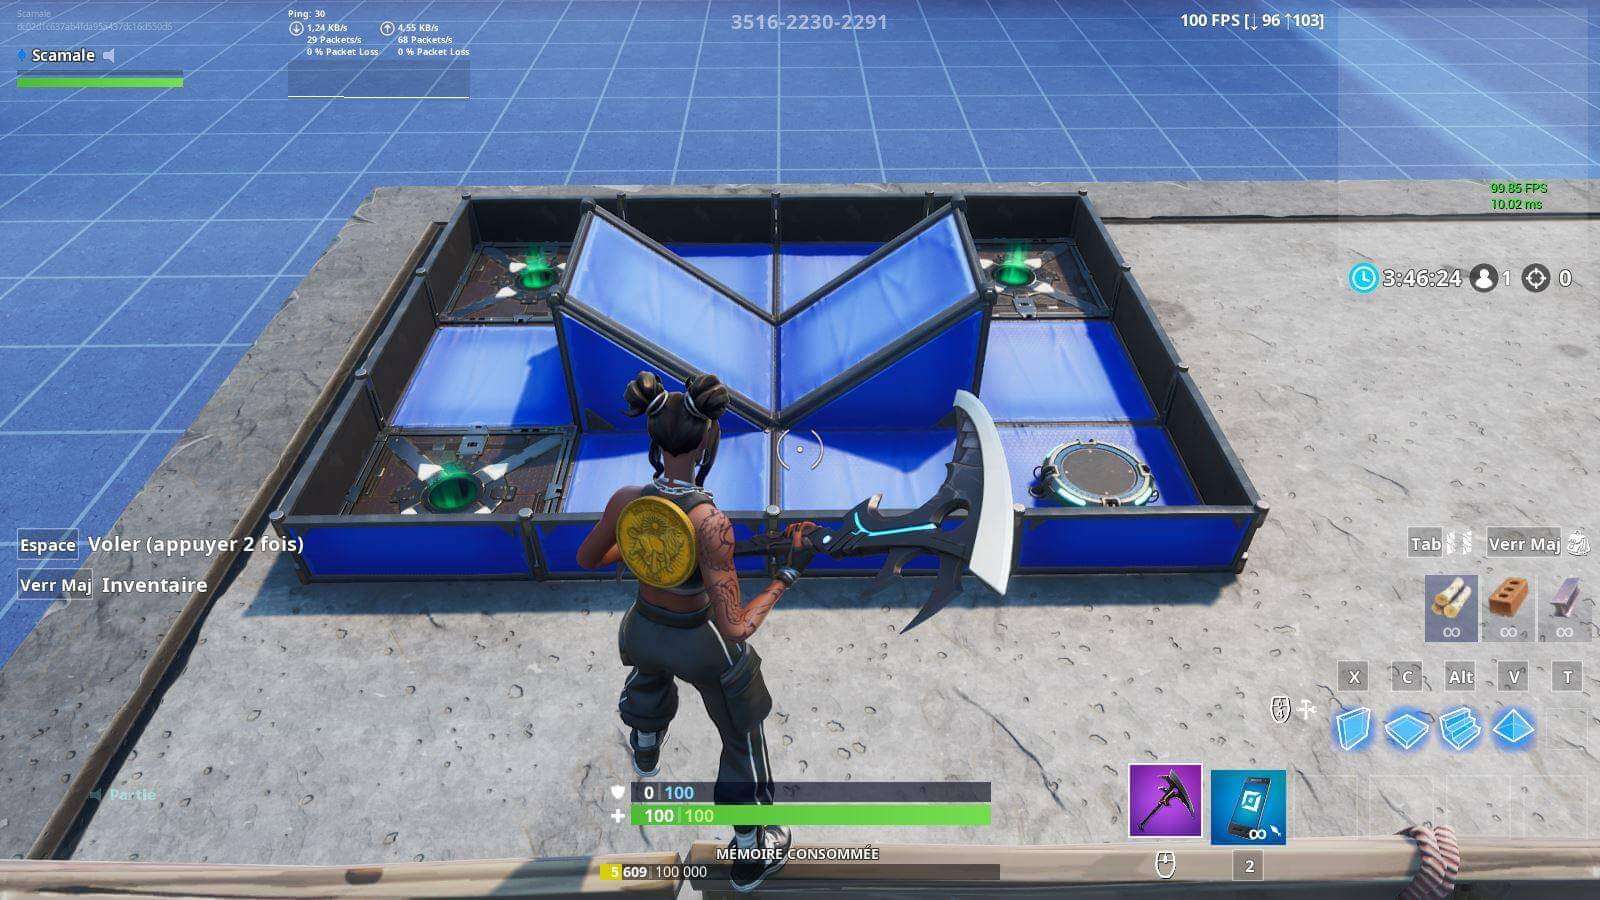 1v1 PRO Build Fight 3290-2117-2651 by panov - Fortnite Creative Map Code 